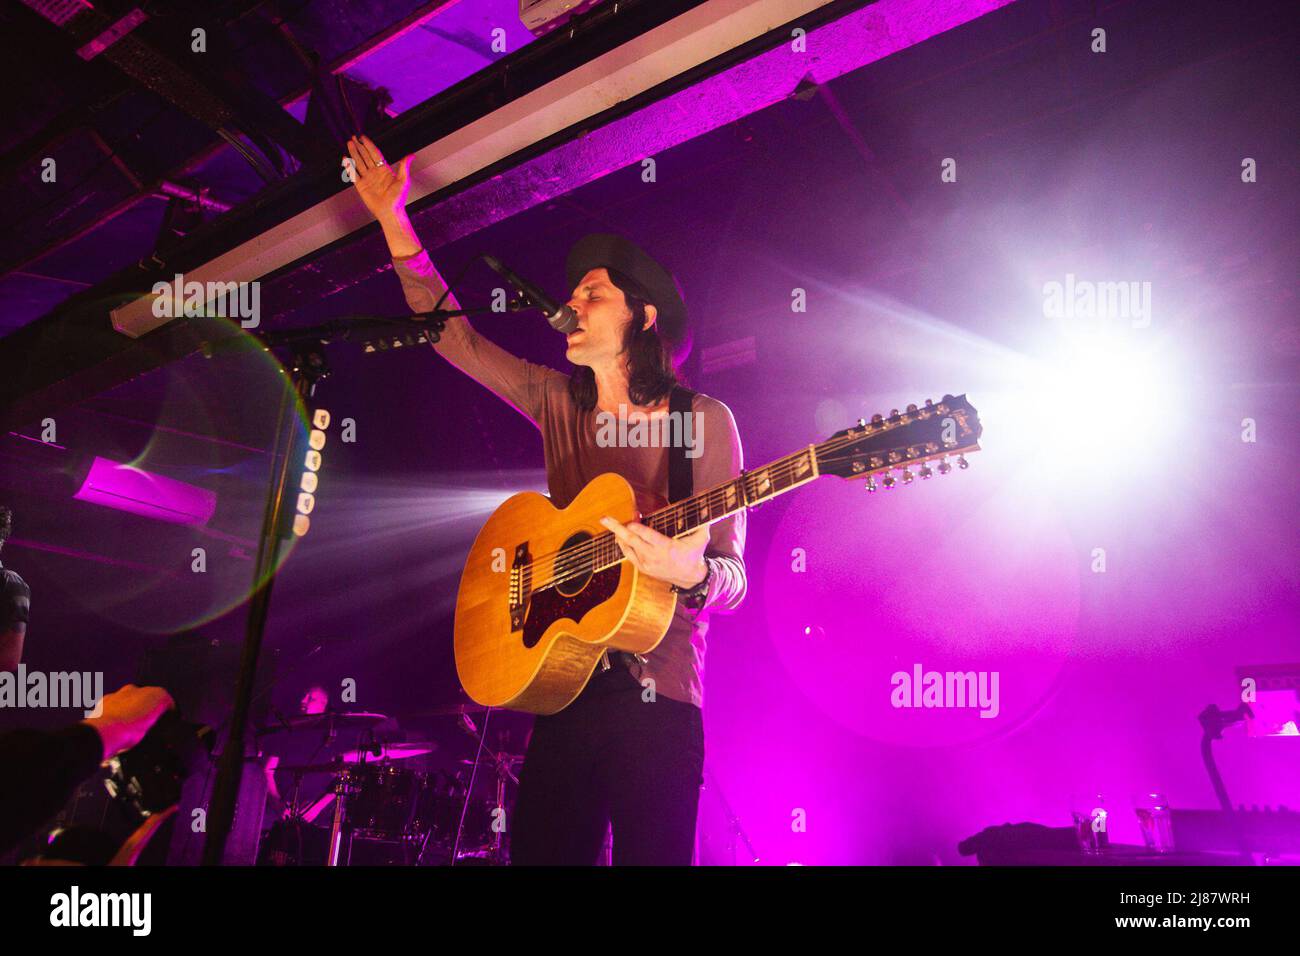 May 13, 2022: English singer-songwriter and guitarist James Bay performs a sold out show at The Leadmill in Sheffield on the last night of his 2022 UK tour. The tour comes before the release of his 3rd studio album â€˜Leapâ€™ released in July. The Leadmill still remains under threat of closing as thousands of people sign a petition to save the iconic venue. Arctic Monkeys, Richard Hawley, Jarvis Cocker and Bring Me The Horizonâ€™s Oli Sykes are among the Sheffield artists to have spoken out in support of the venue (Credit Image: © Myles Wright/ZUMA Press Wire) Stock Photo